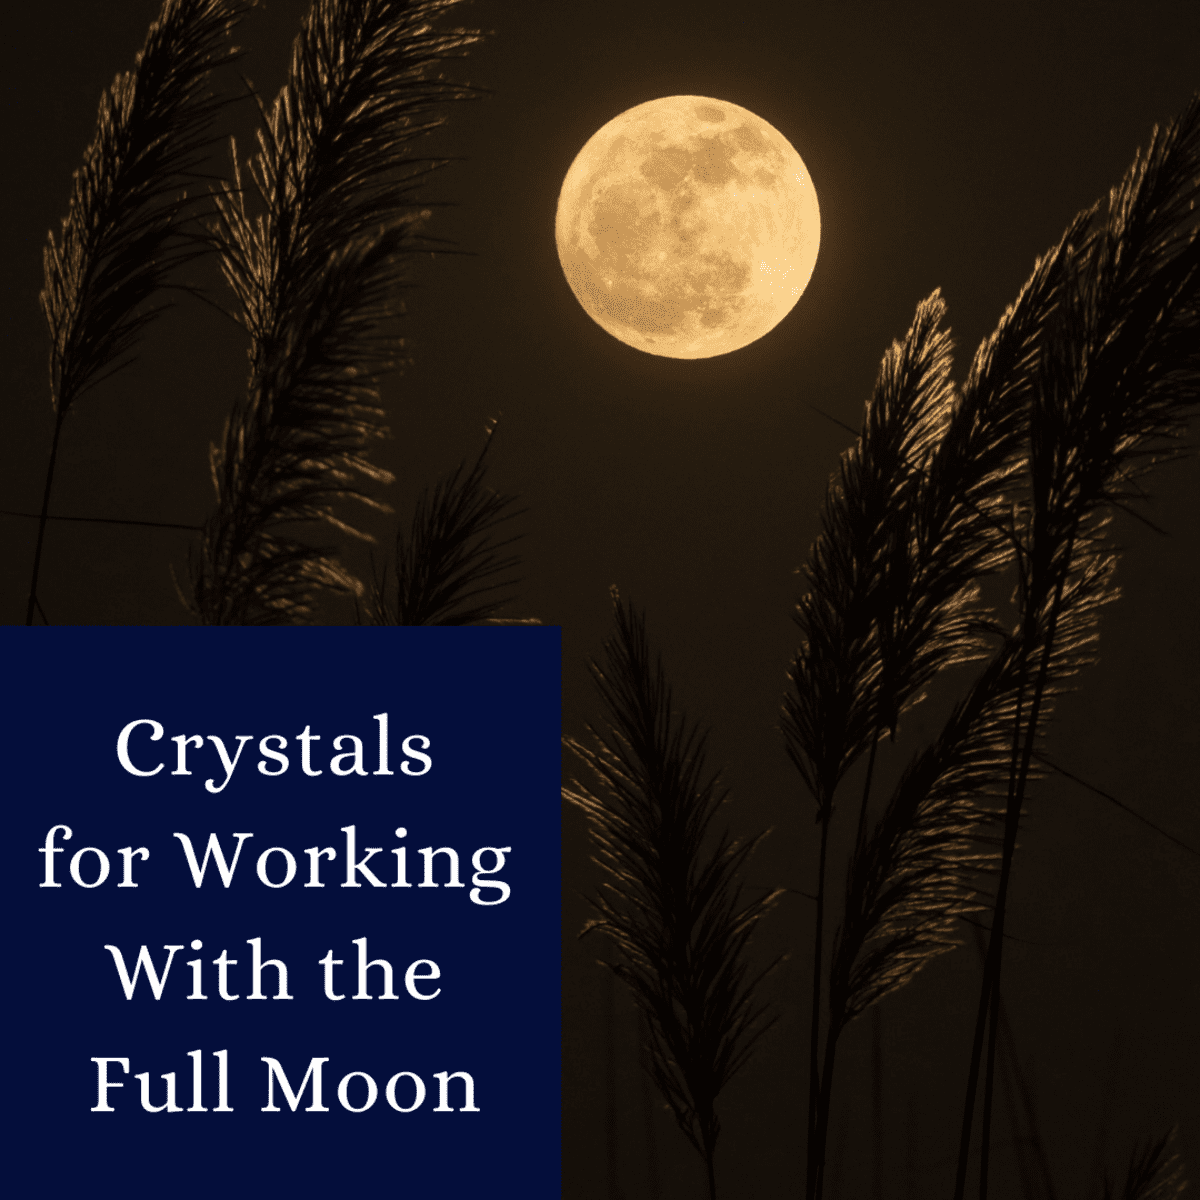 7 Crystals for Working With Full Moon Energy - Exemplore